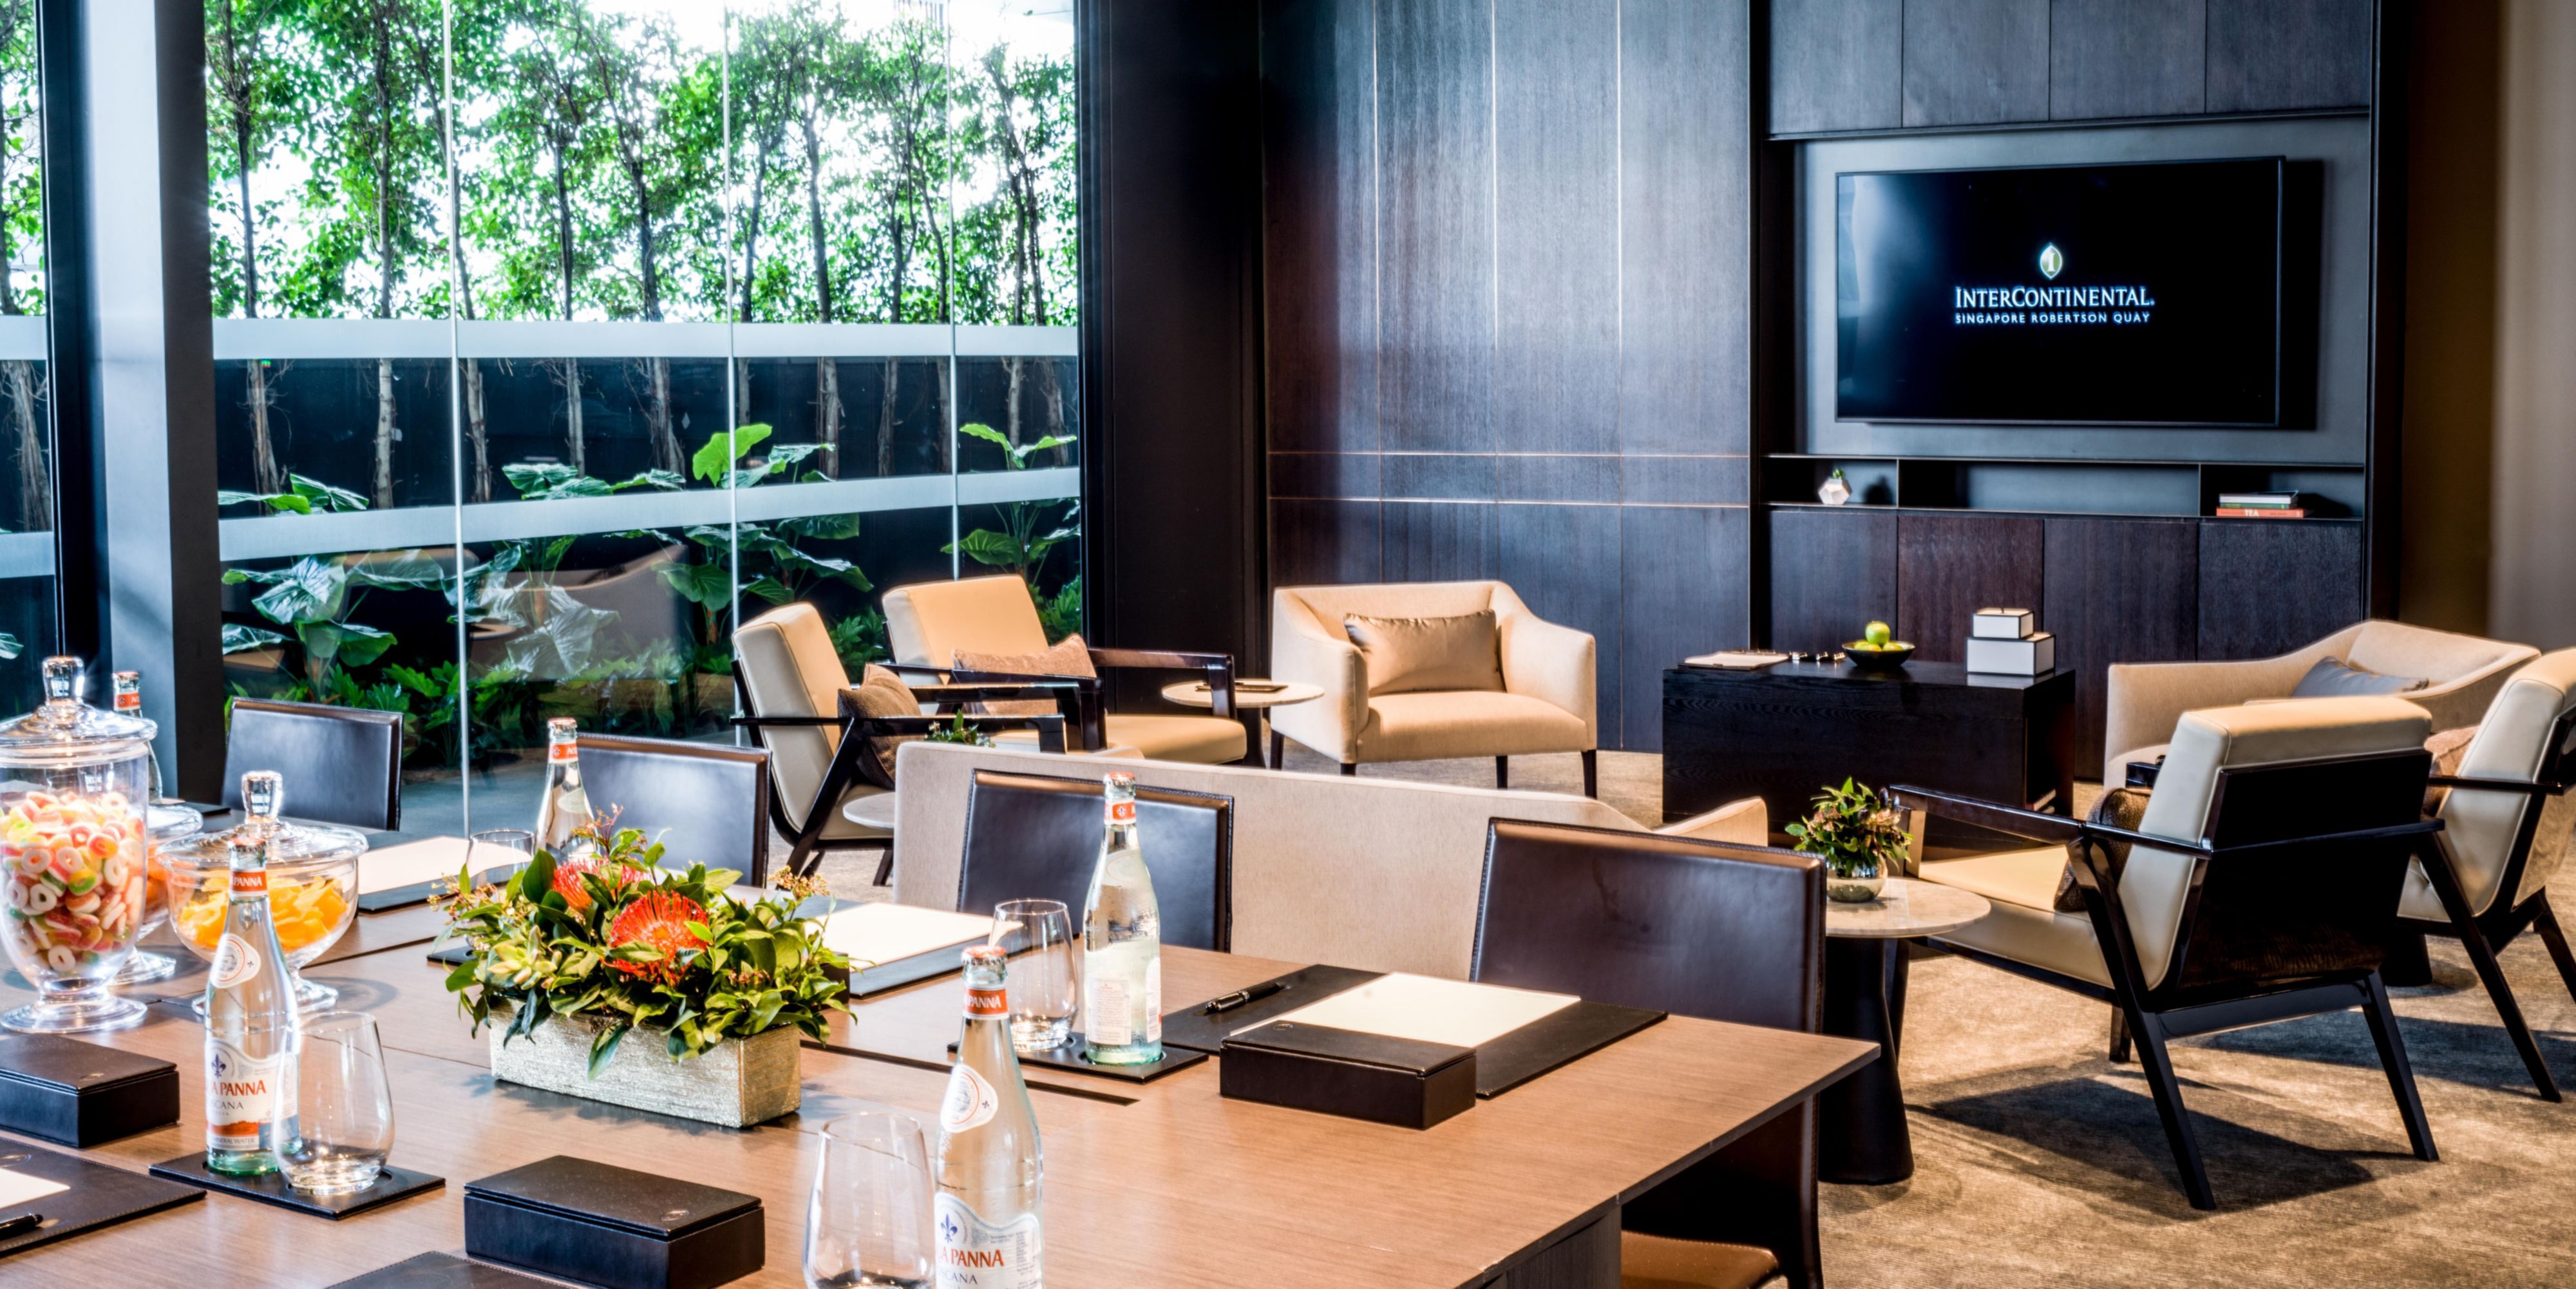 Located on level four, The Residence is a stylish and professional meeting and event space surrounded by floor-to-ceiling glass windows that let in natural light, as well as a lush, green garden terrace with state-of-the-art amenities and flexibility for breakout sessions.